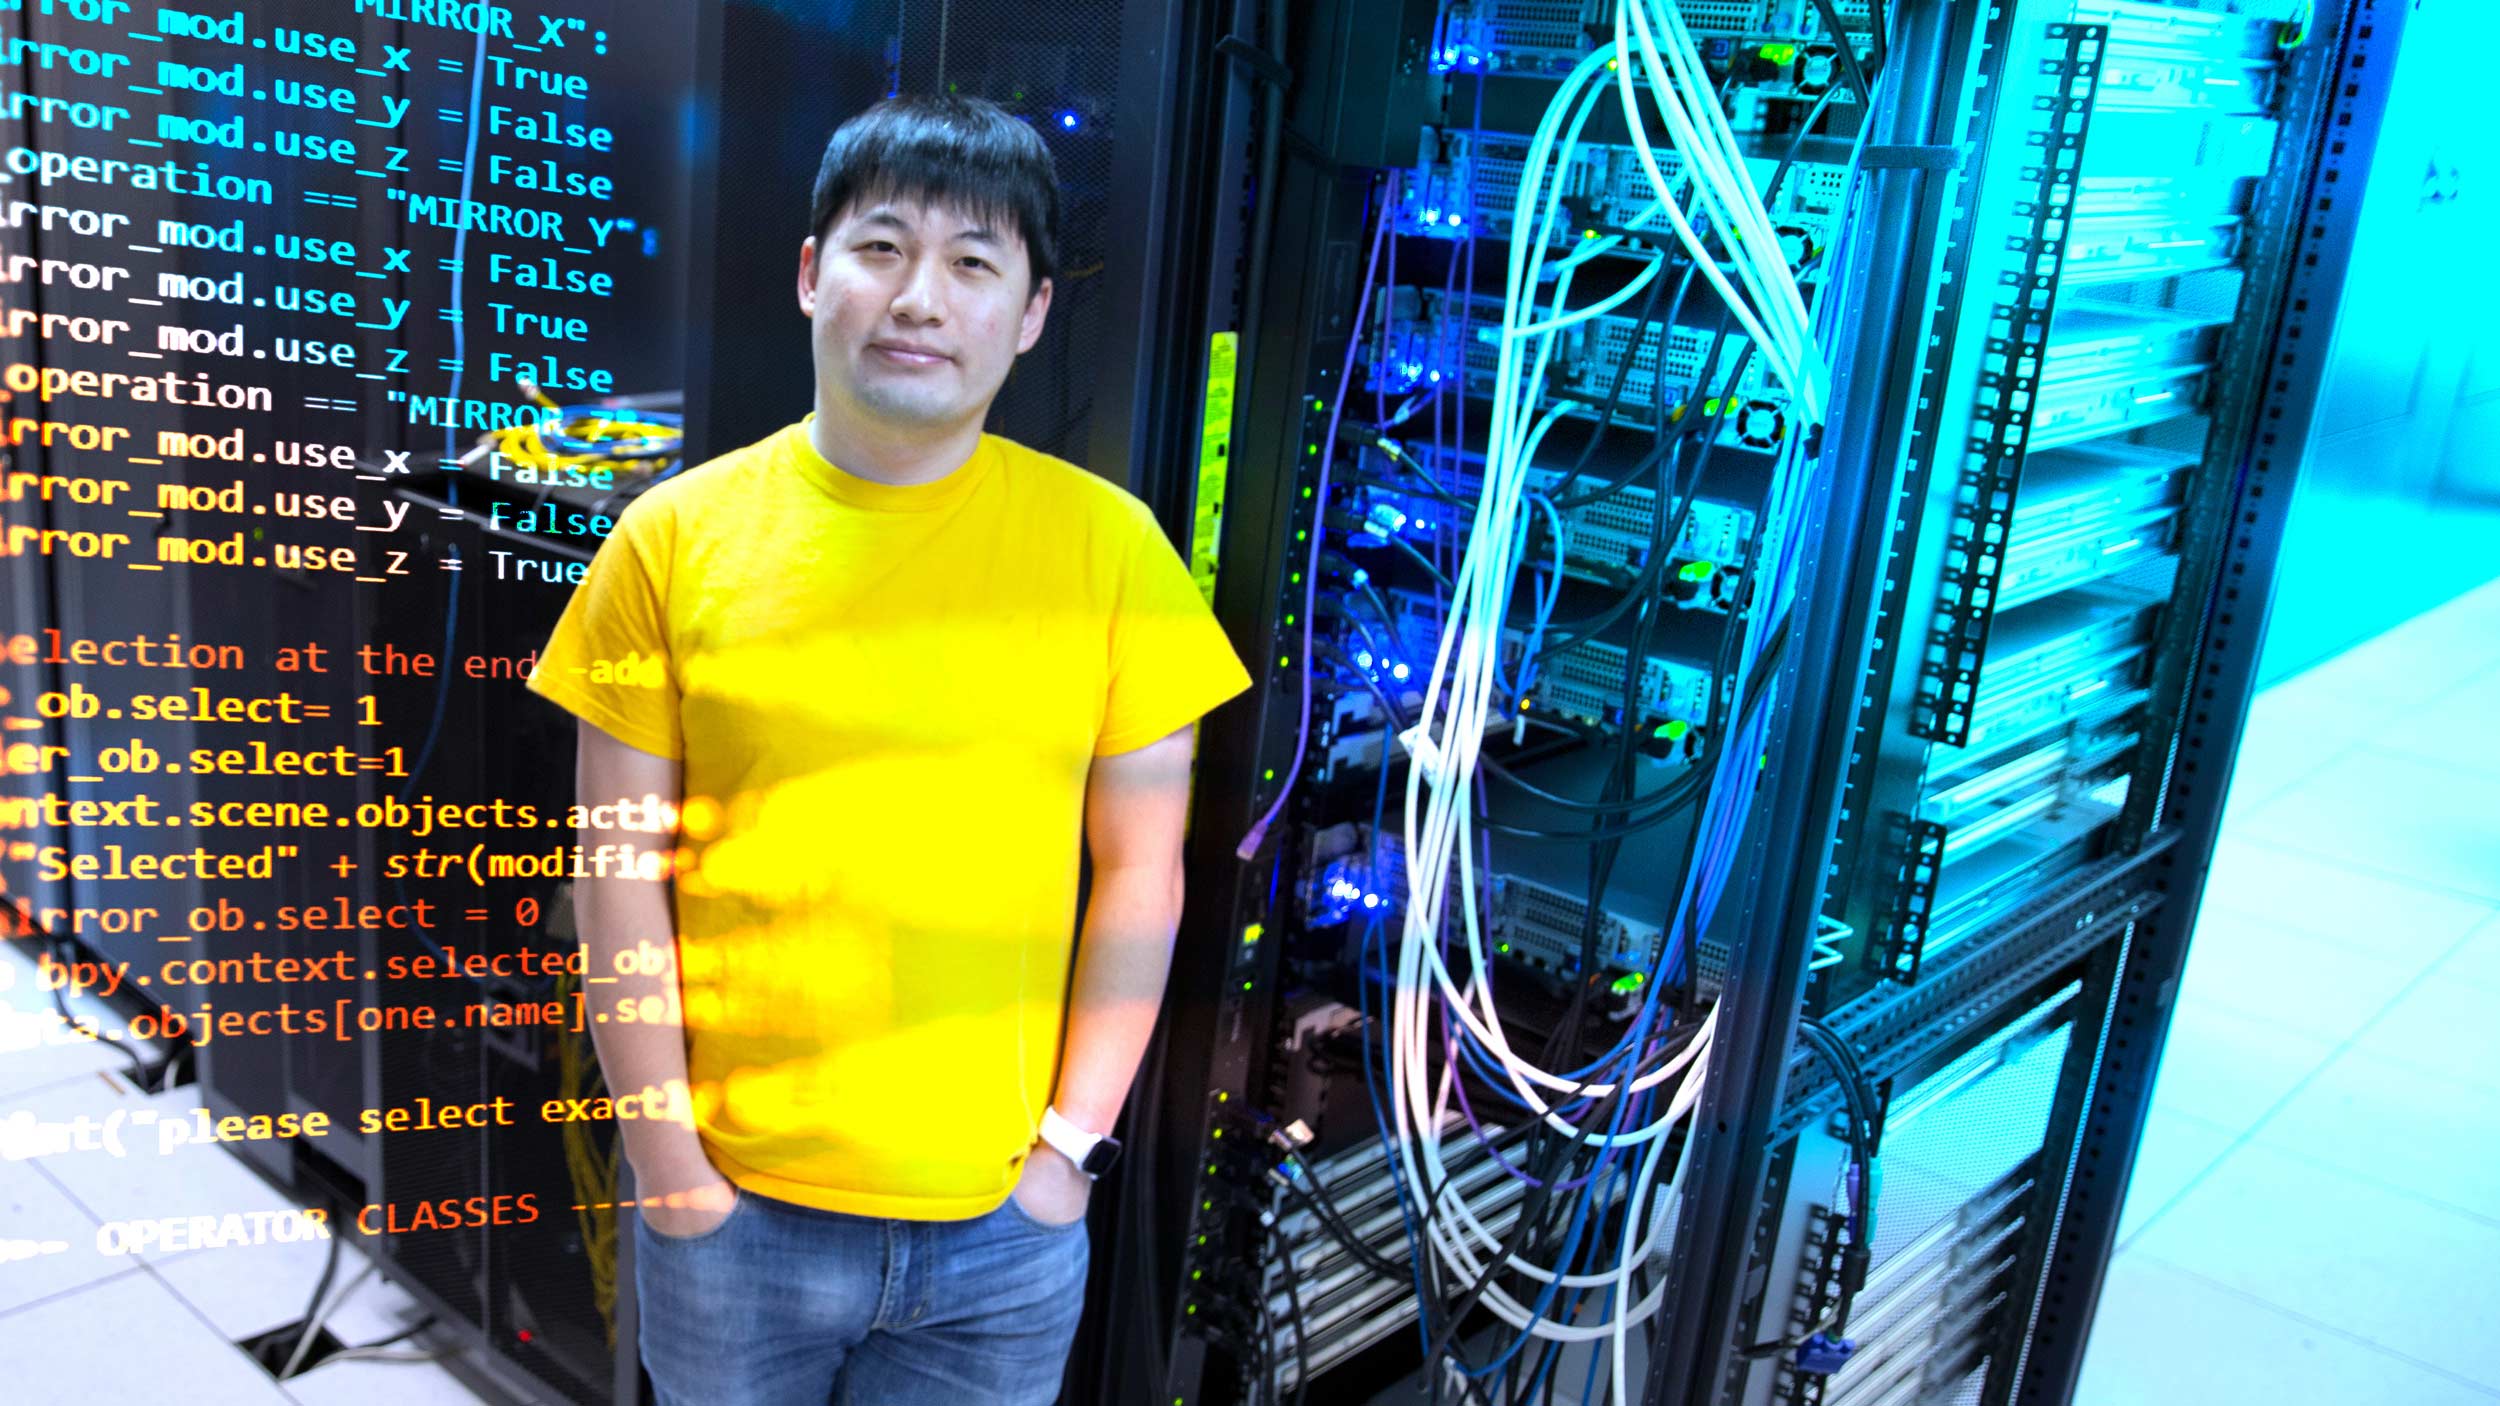 Fish Wang standing next to computer processors